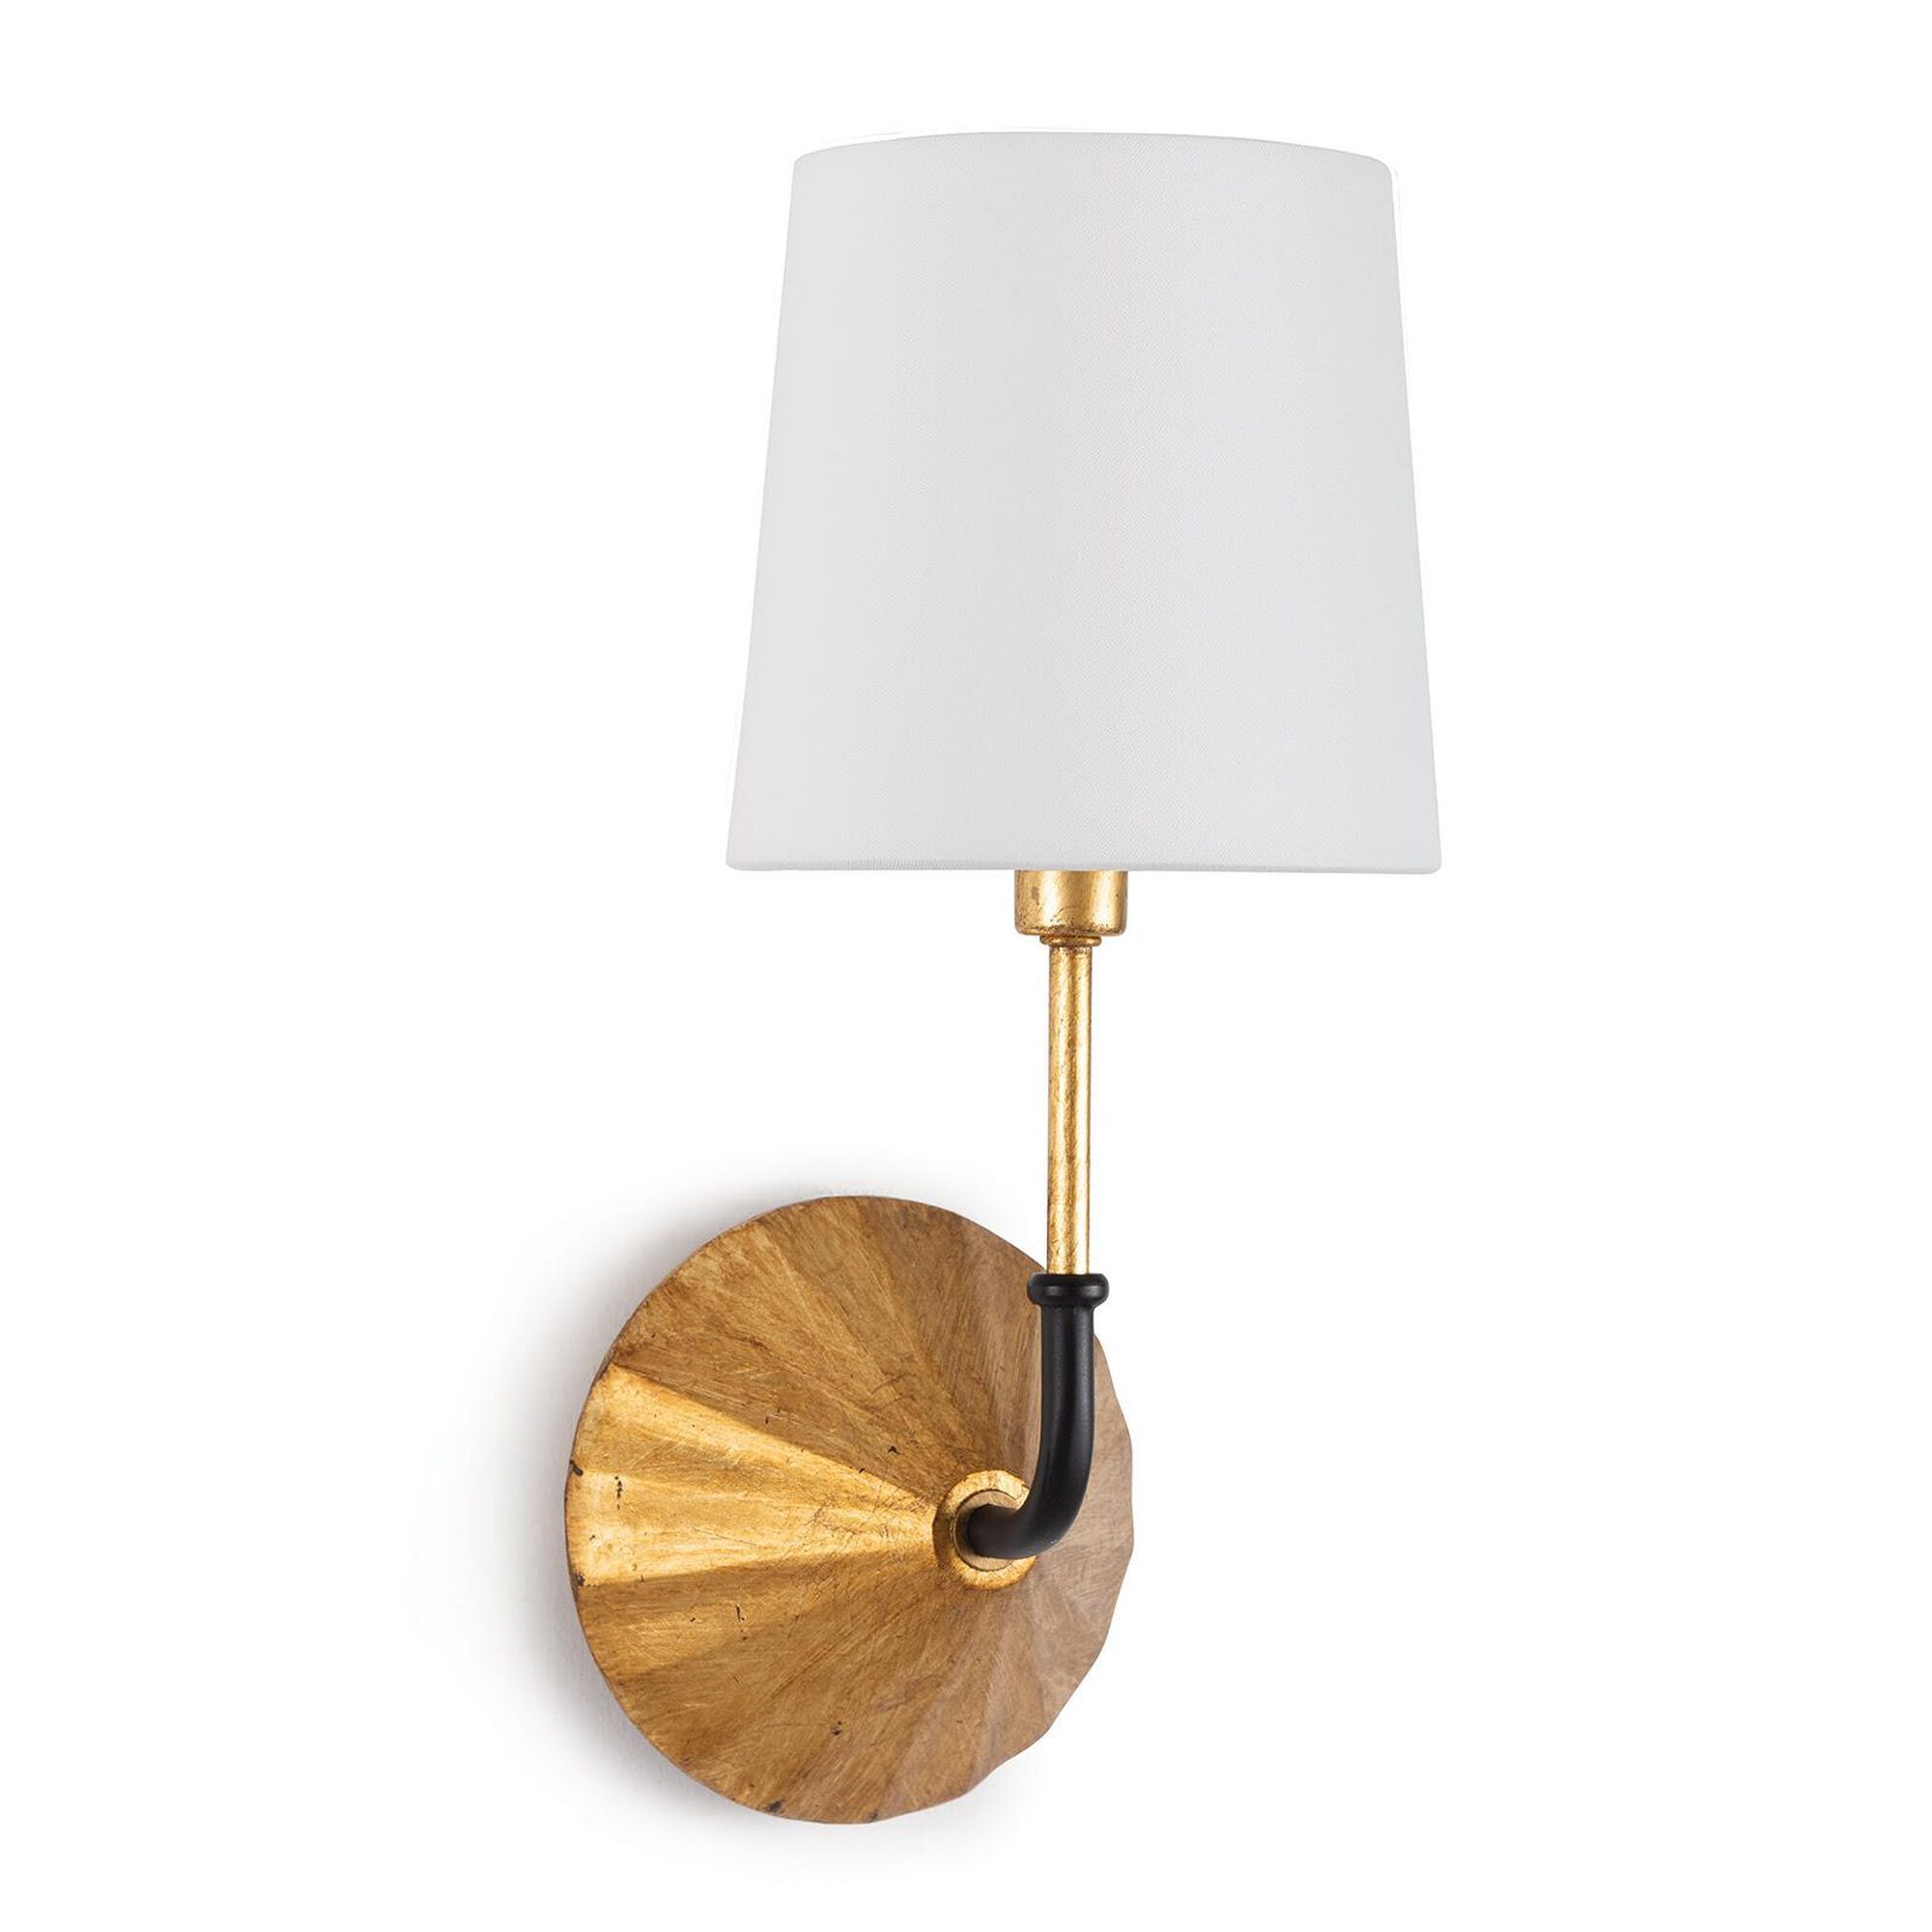 Parasol 14 Inch Wall Sconce by Regina Andrew | Capitol Lighting 1800lighting.com